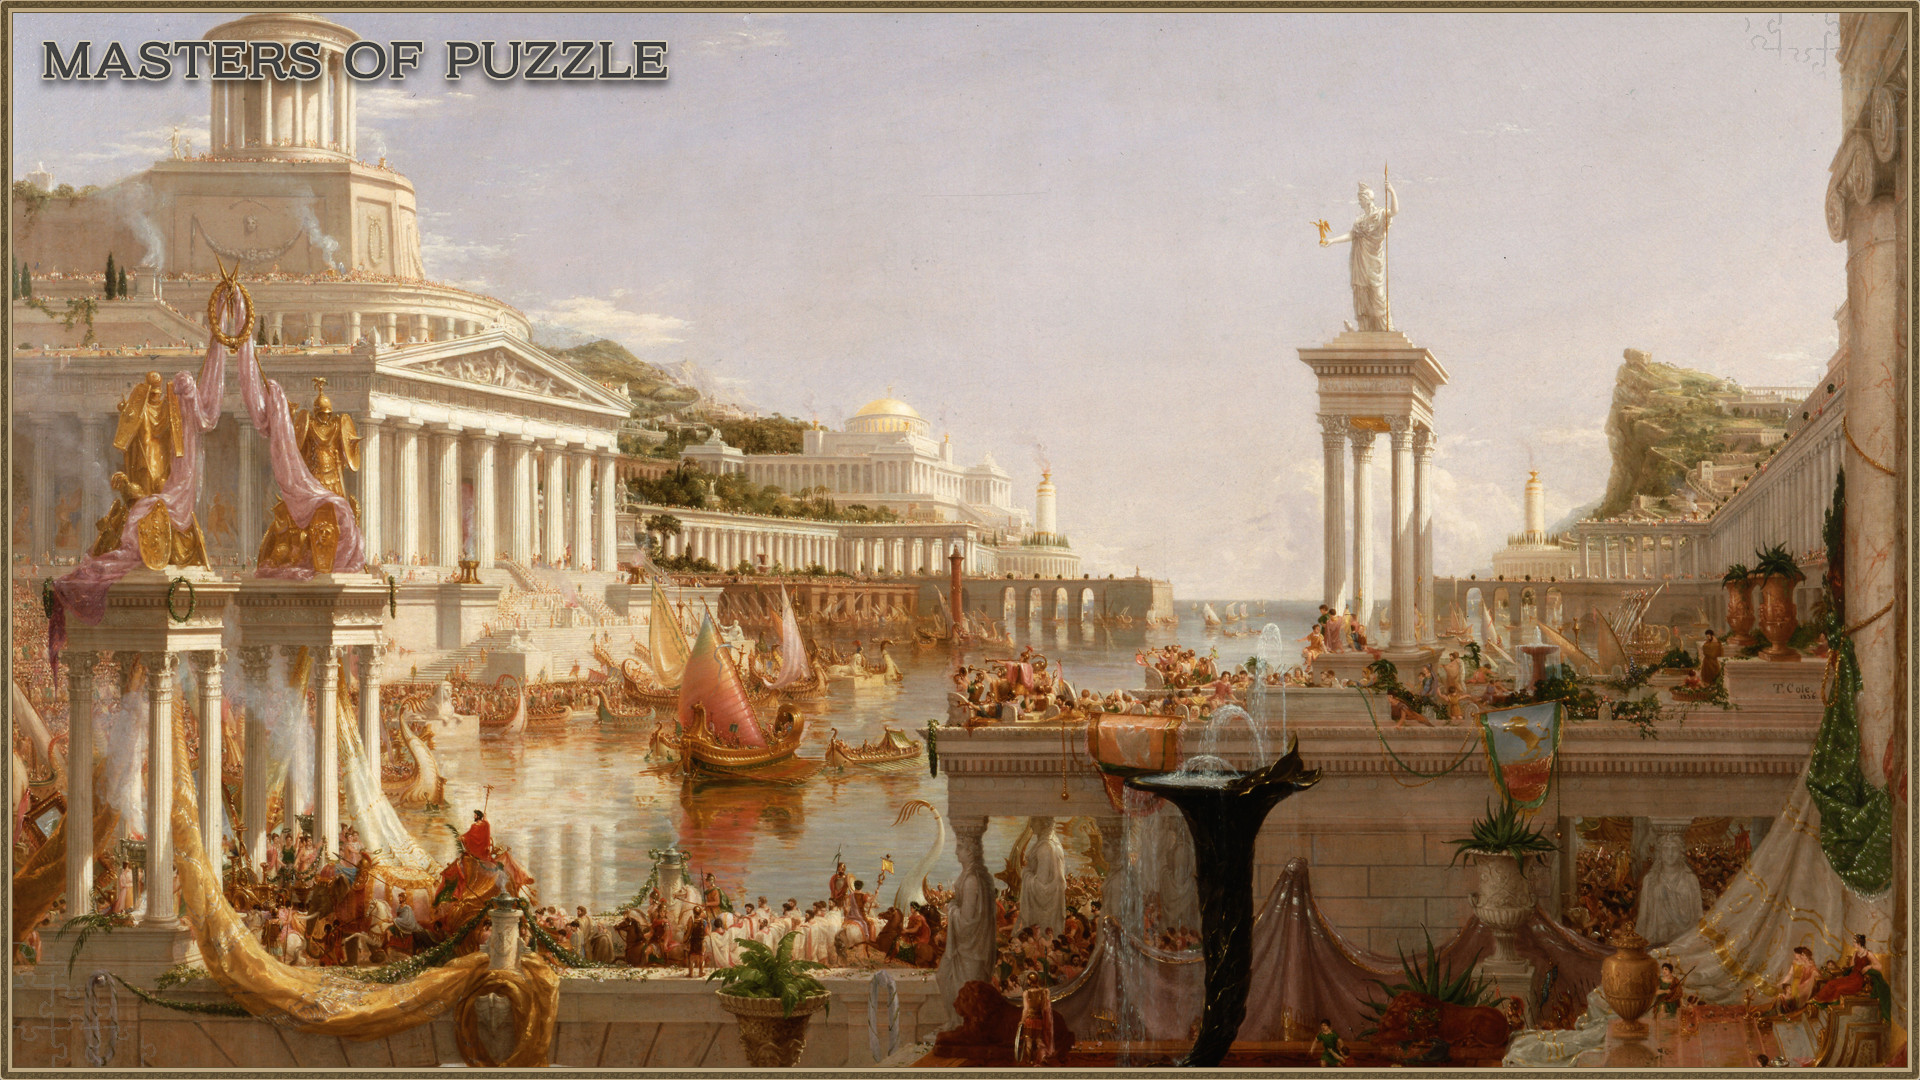 Masters Of Puzzle The Consummation Of Empire By Thomas Cole On Steam Images, Photos, Reviews